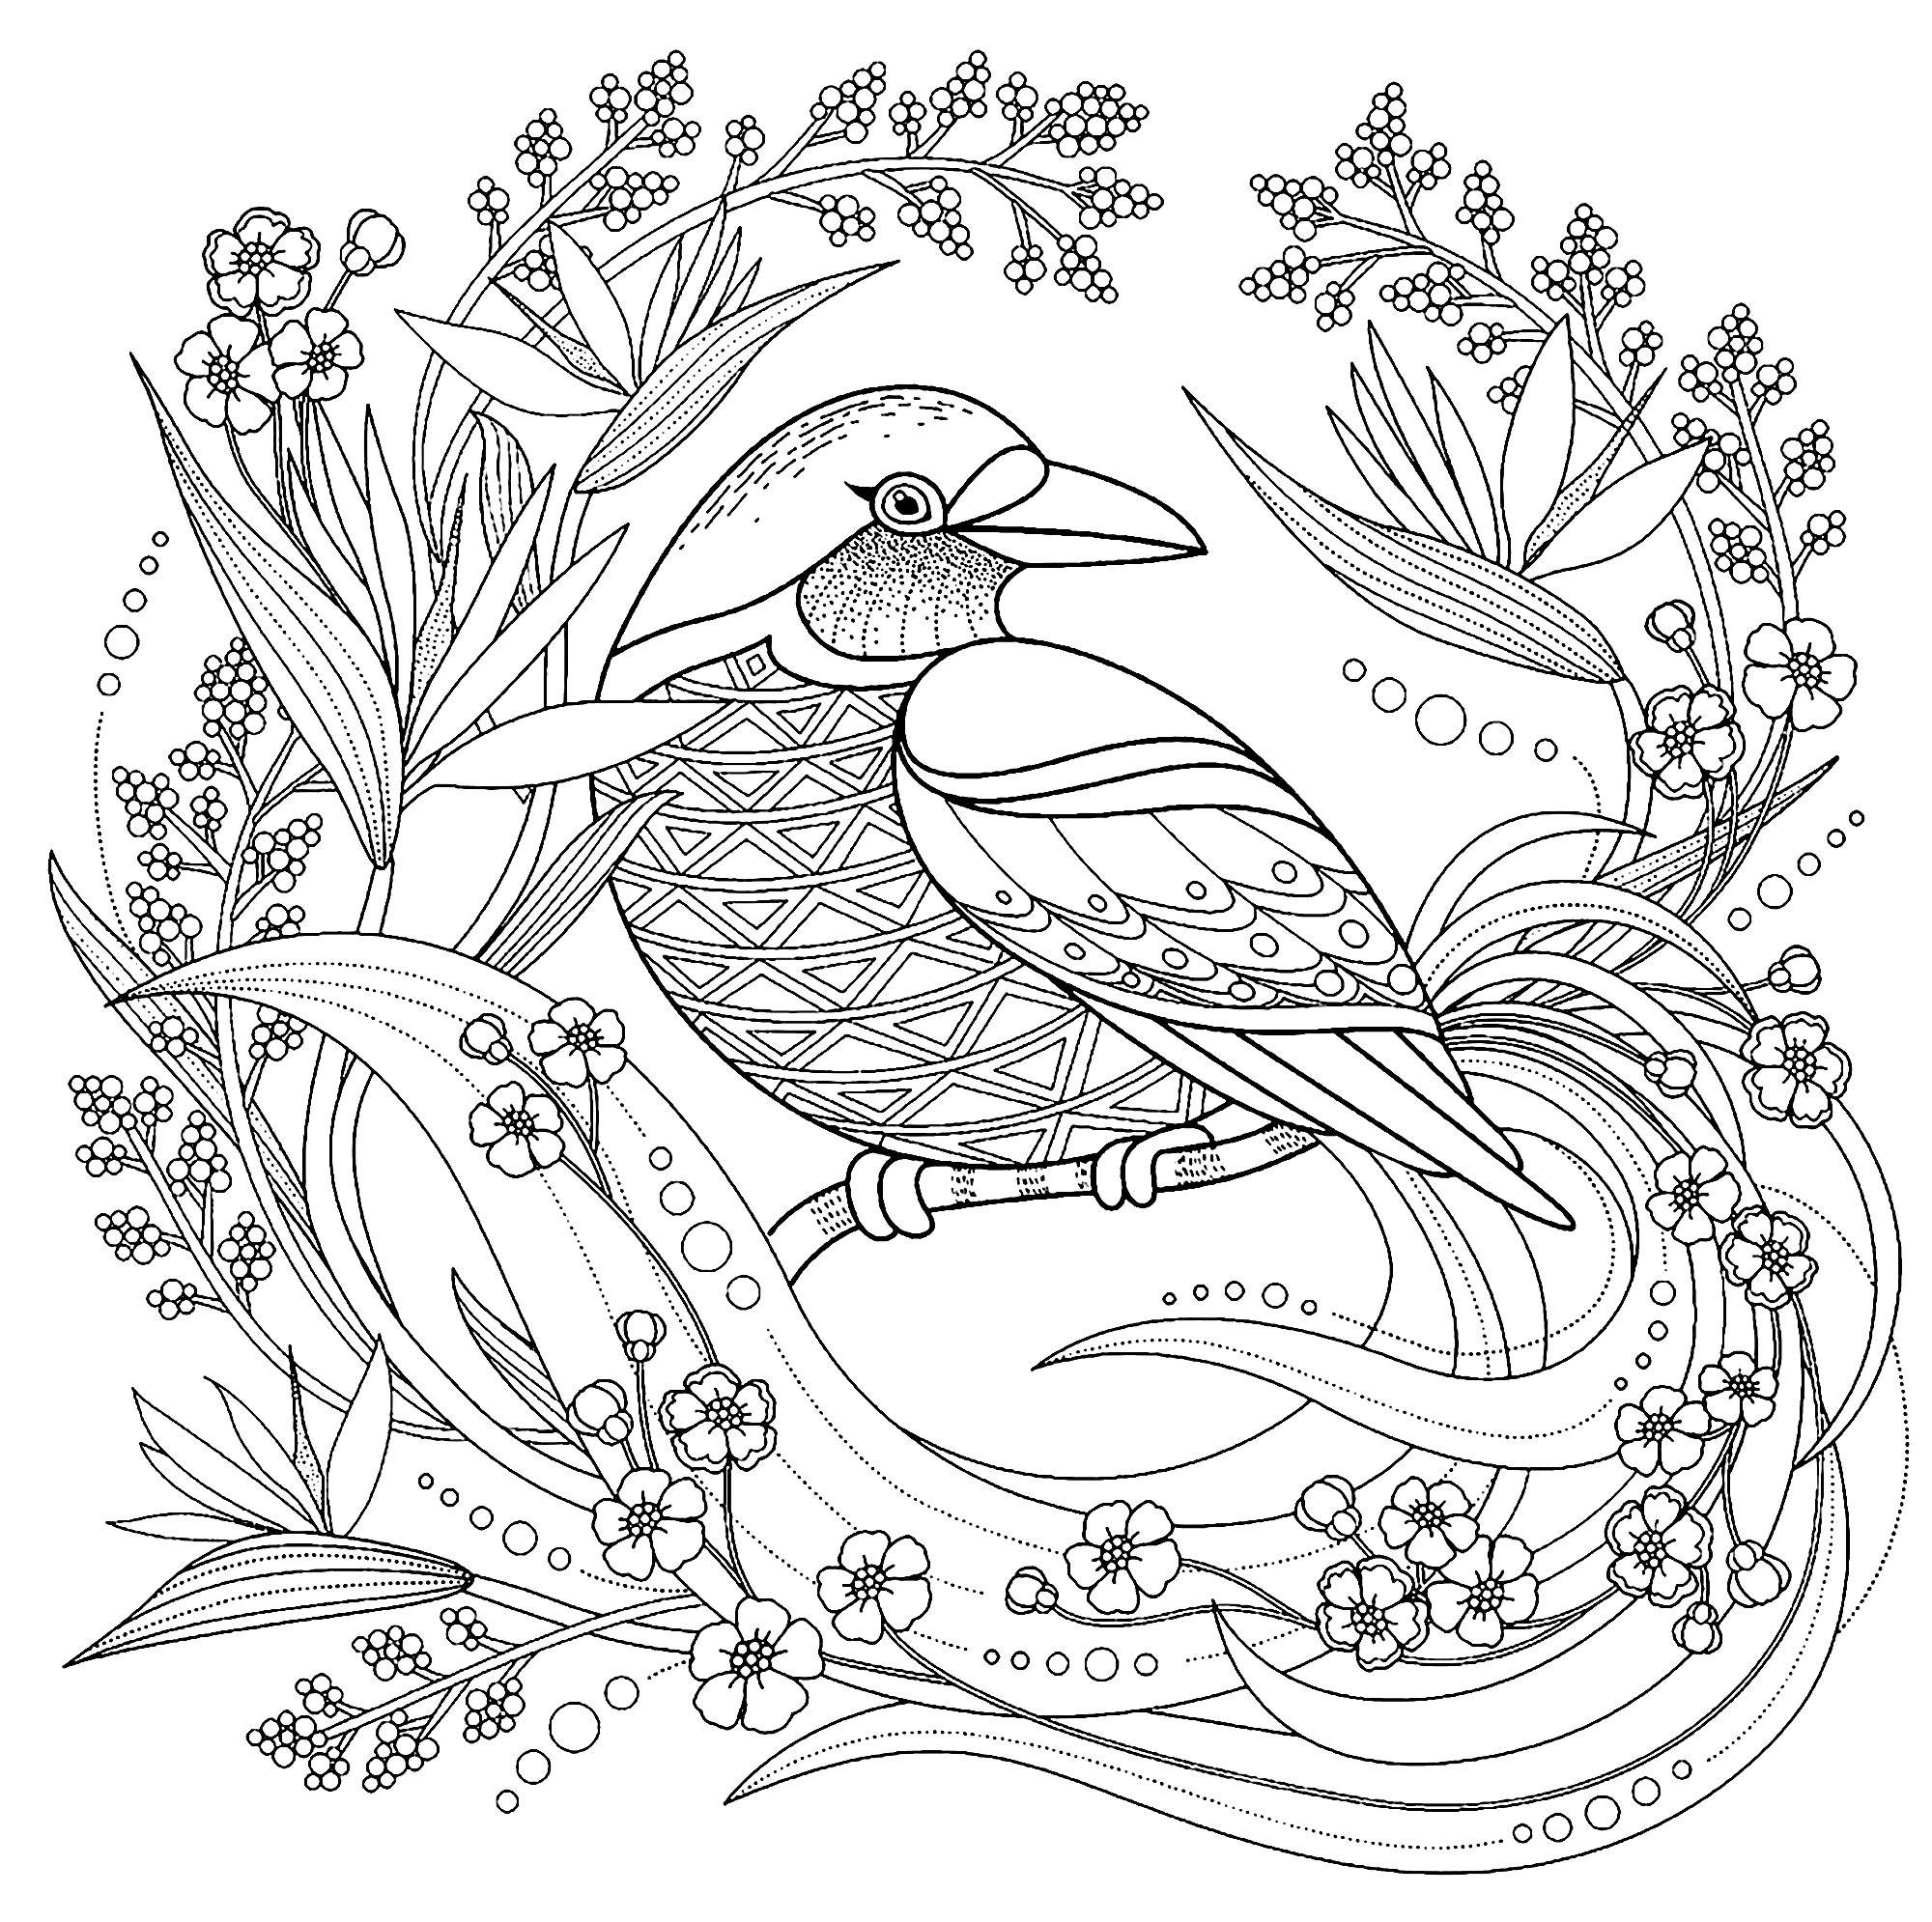 Download Bird with floral elements - Birds Adult Coloring Pages